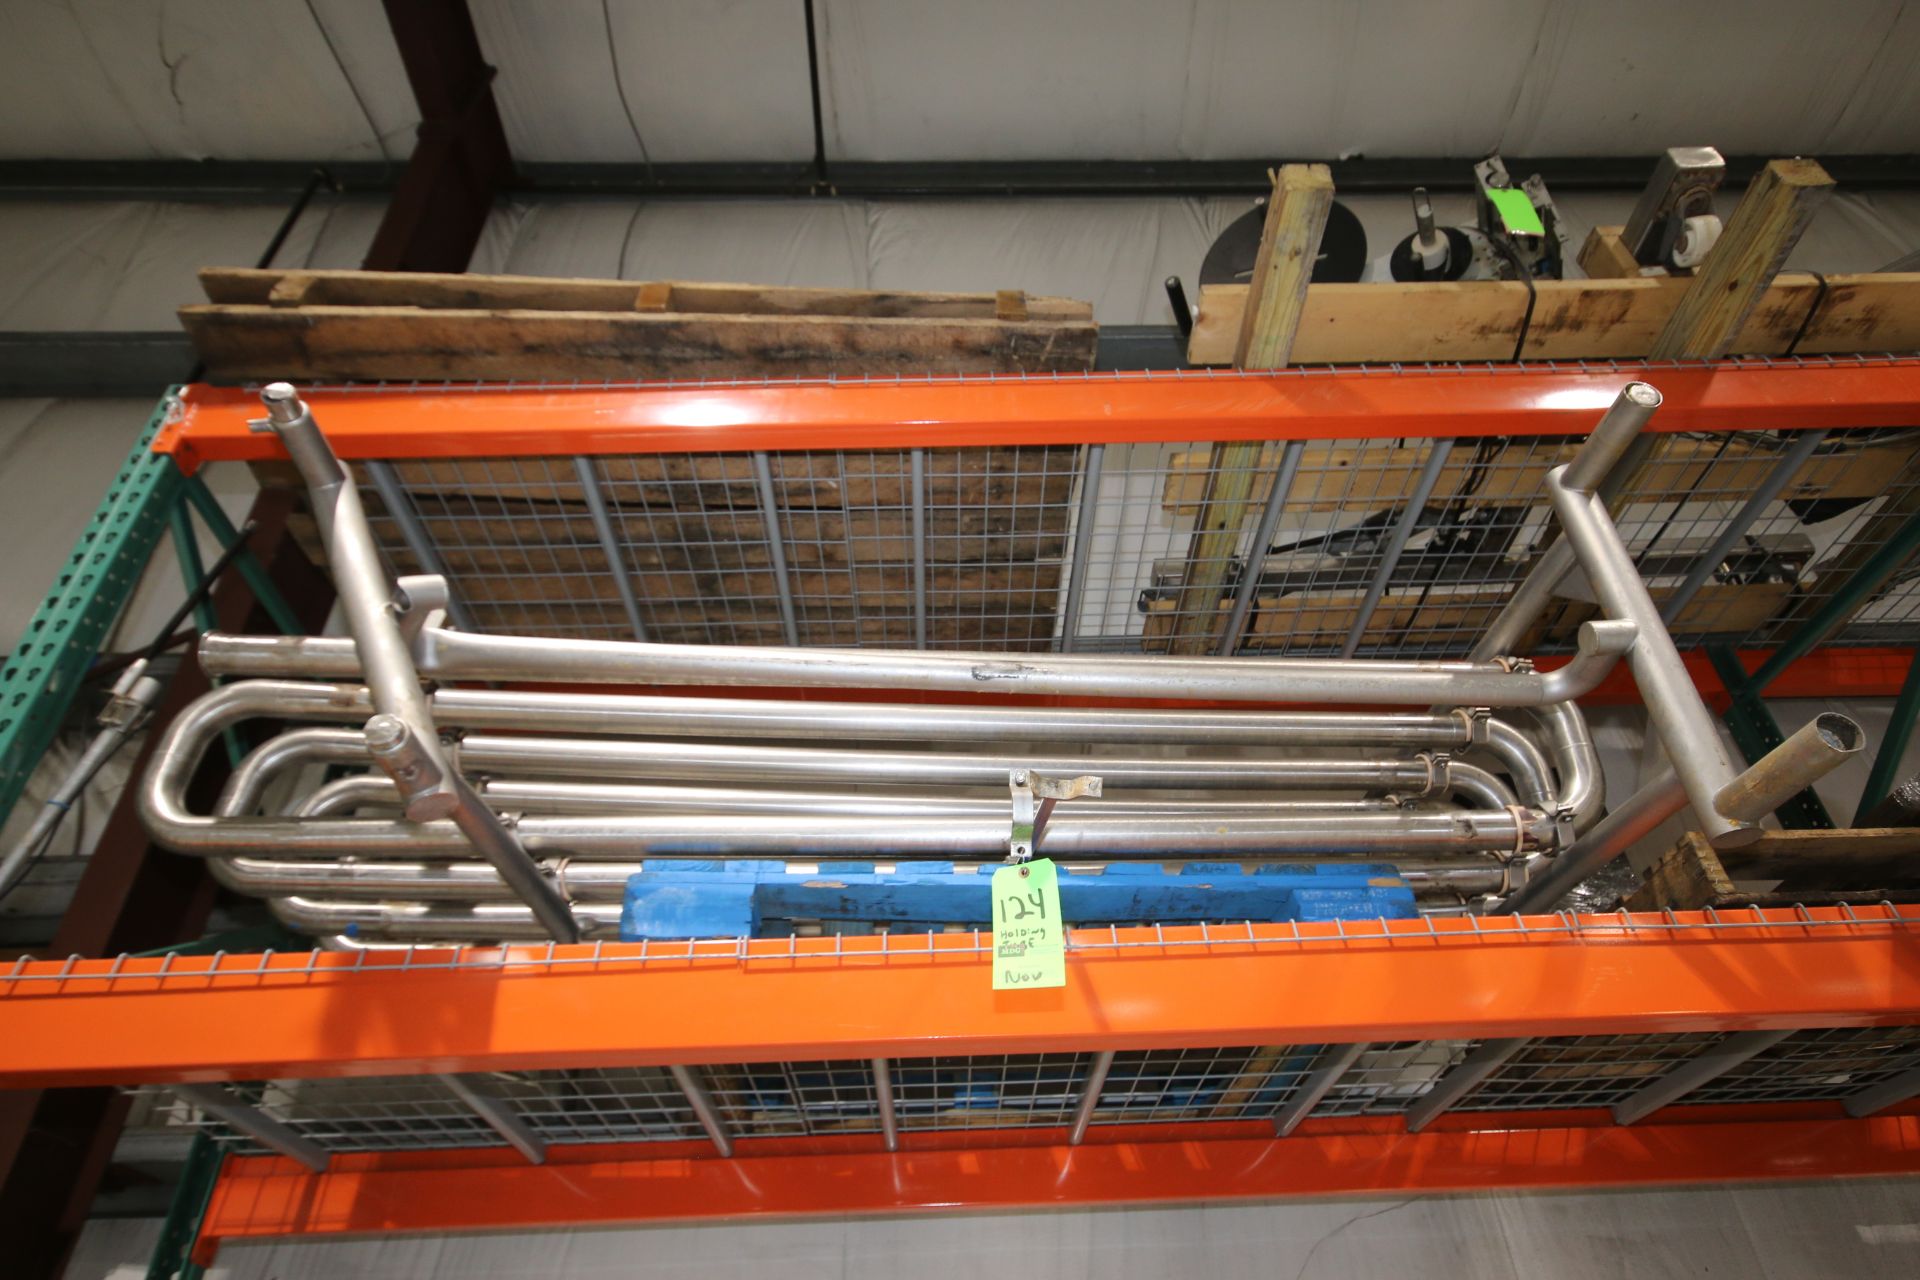 2" S/S Nested Folding Tube Approx. 90" L x 4' H Mounted on S/S Rack, note: Rack Damaged from